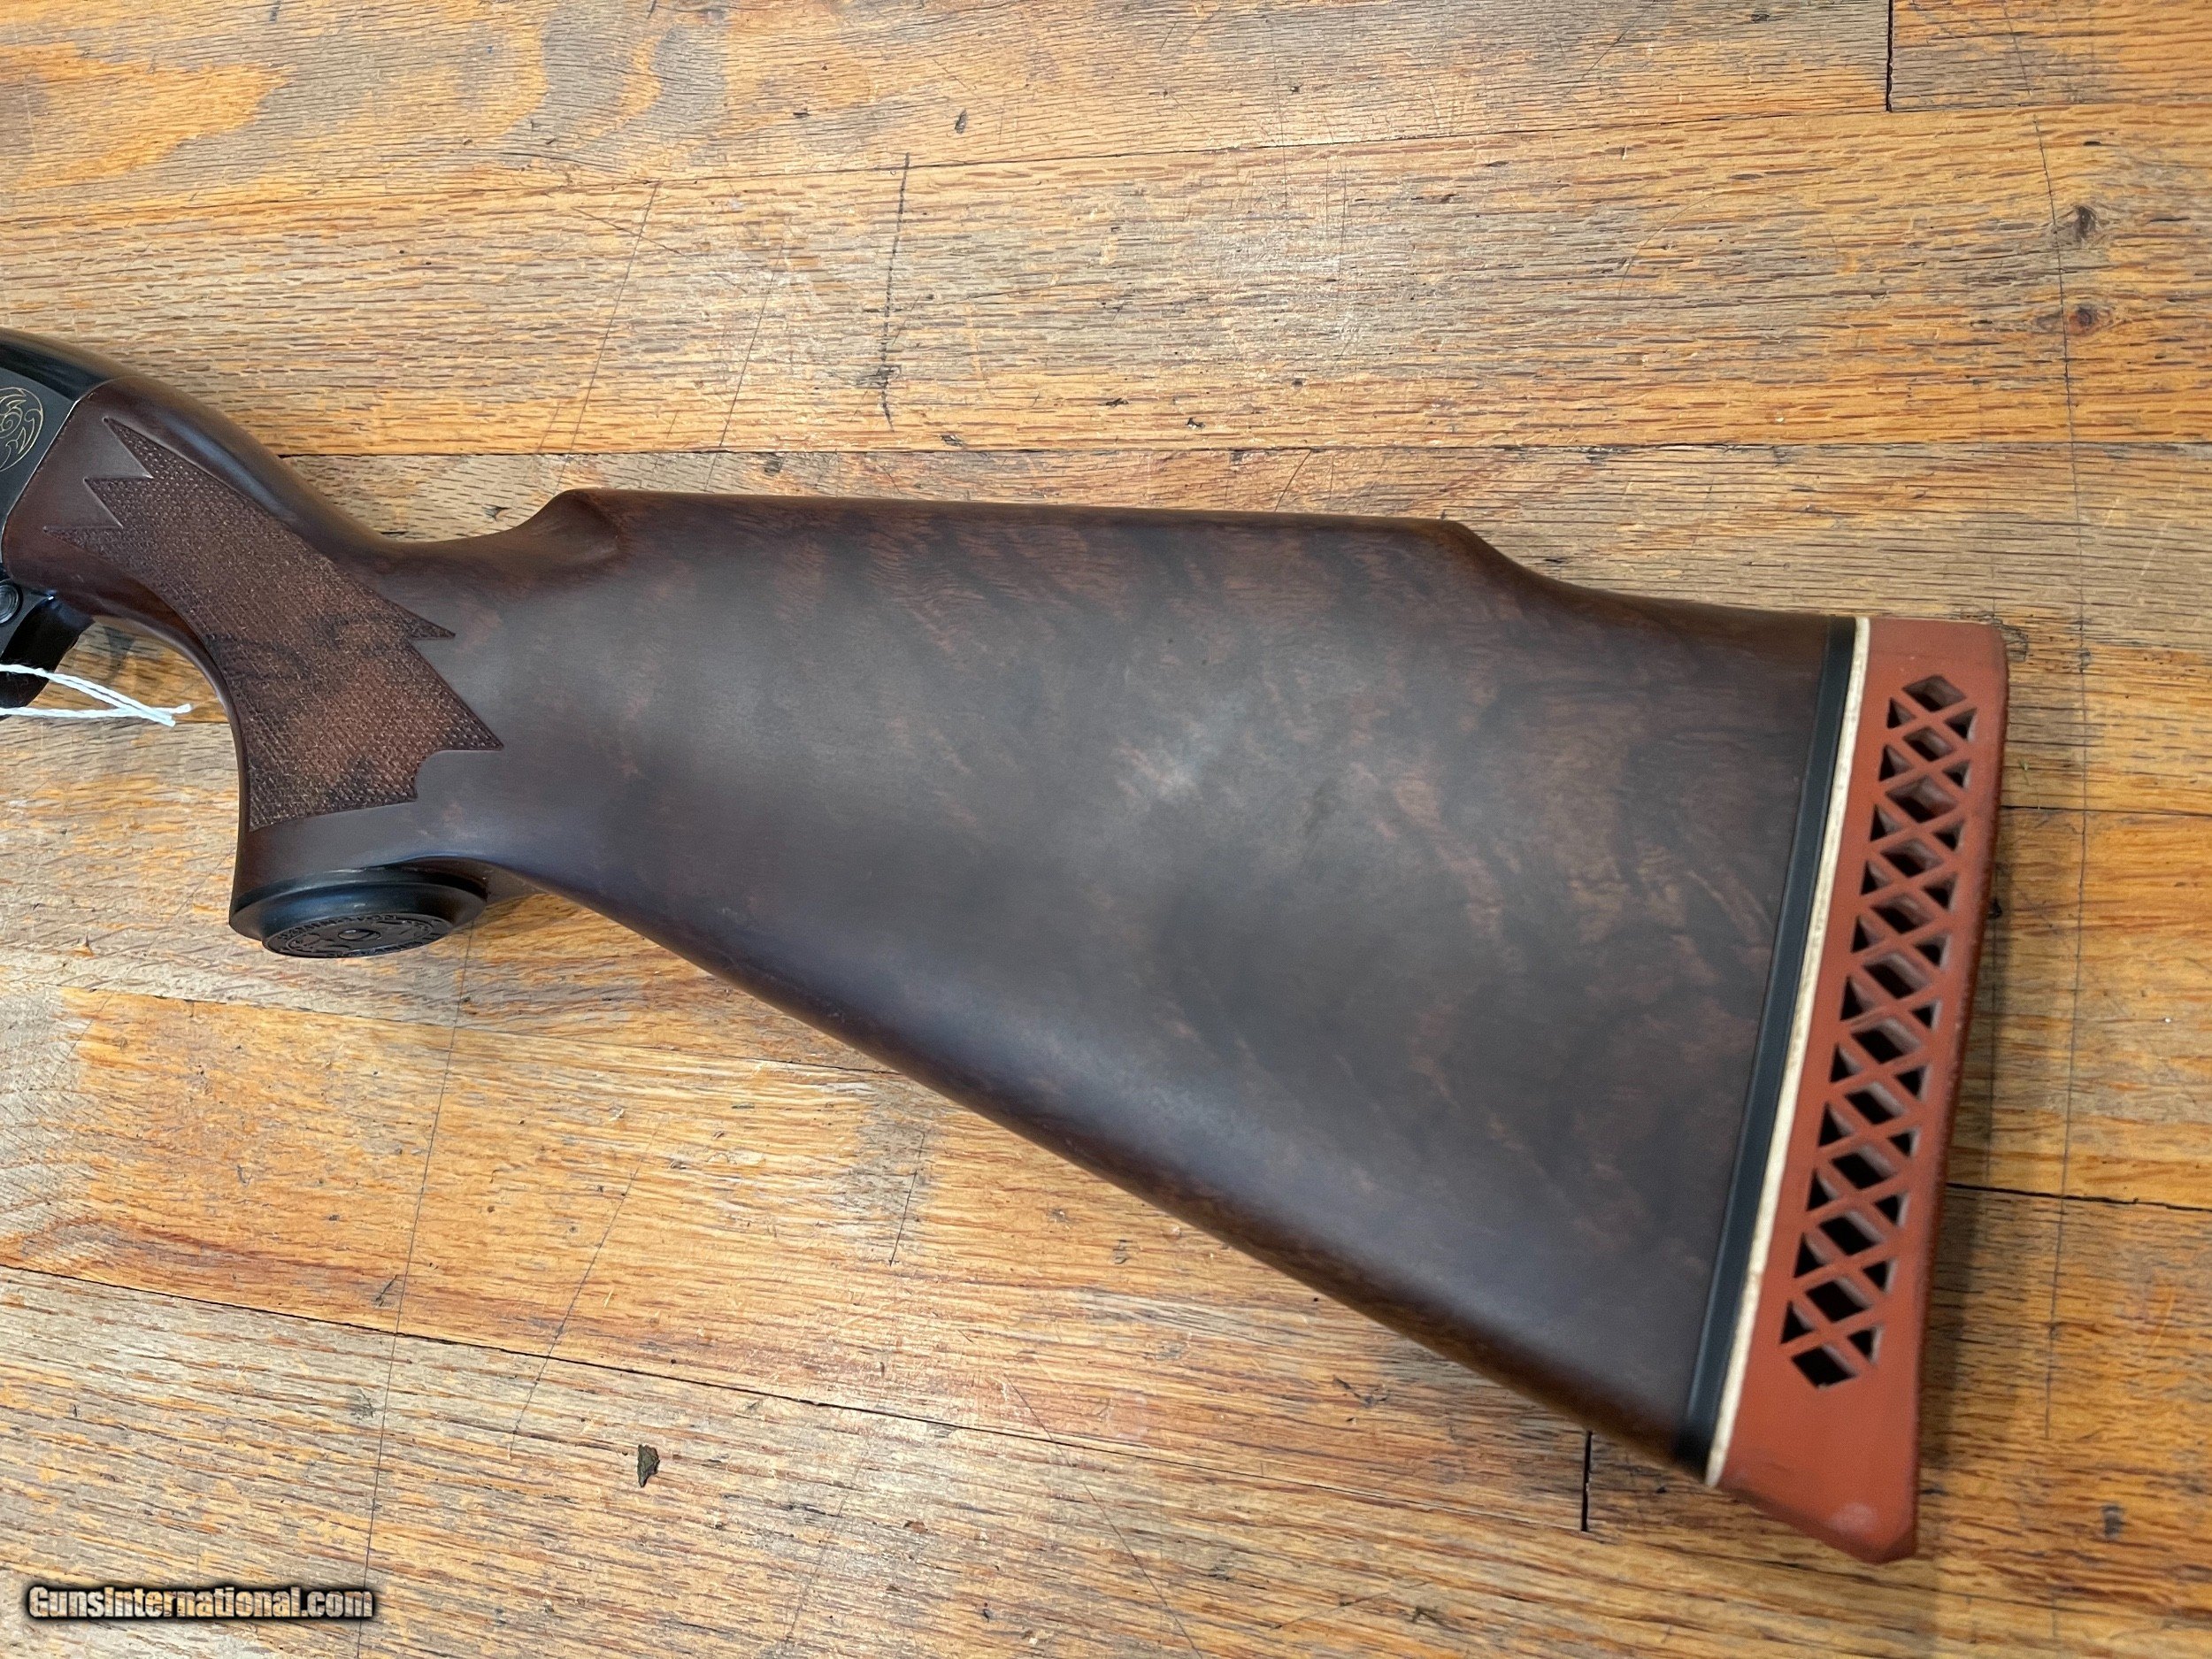 freedom arms remington 870 serial numbers